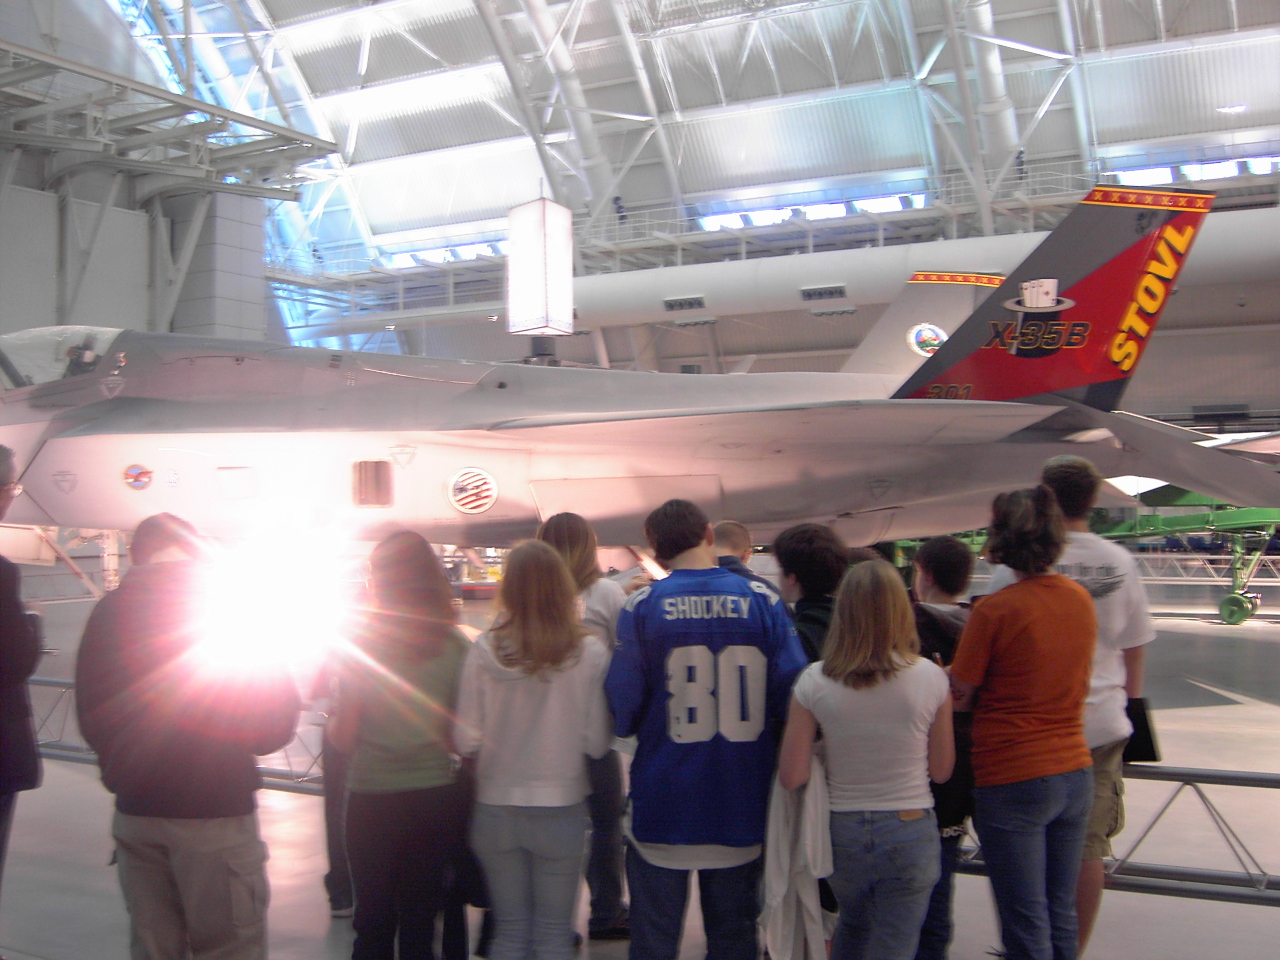 Students at the Air & Space Museum